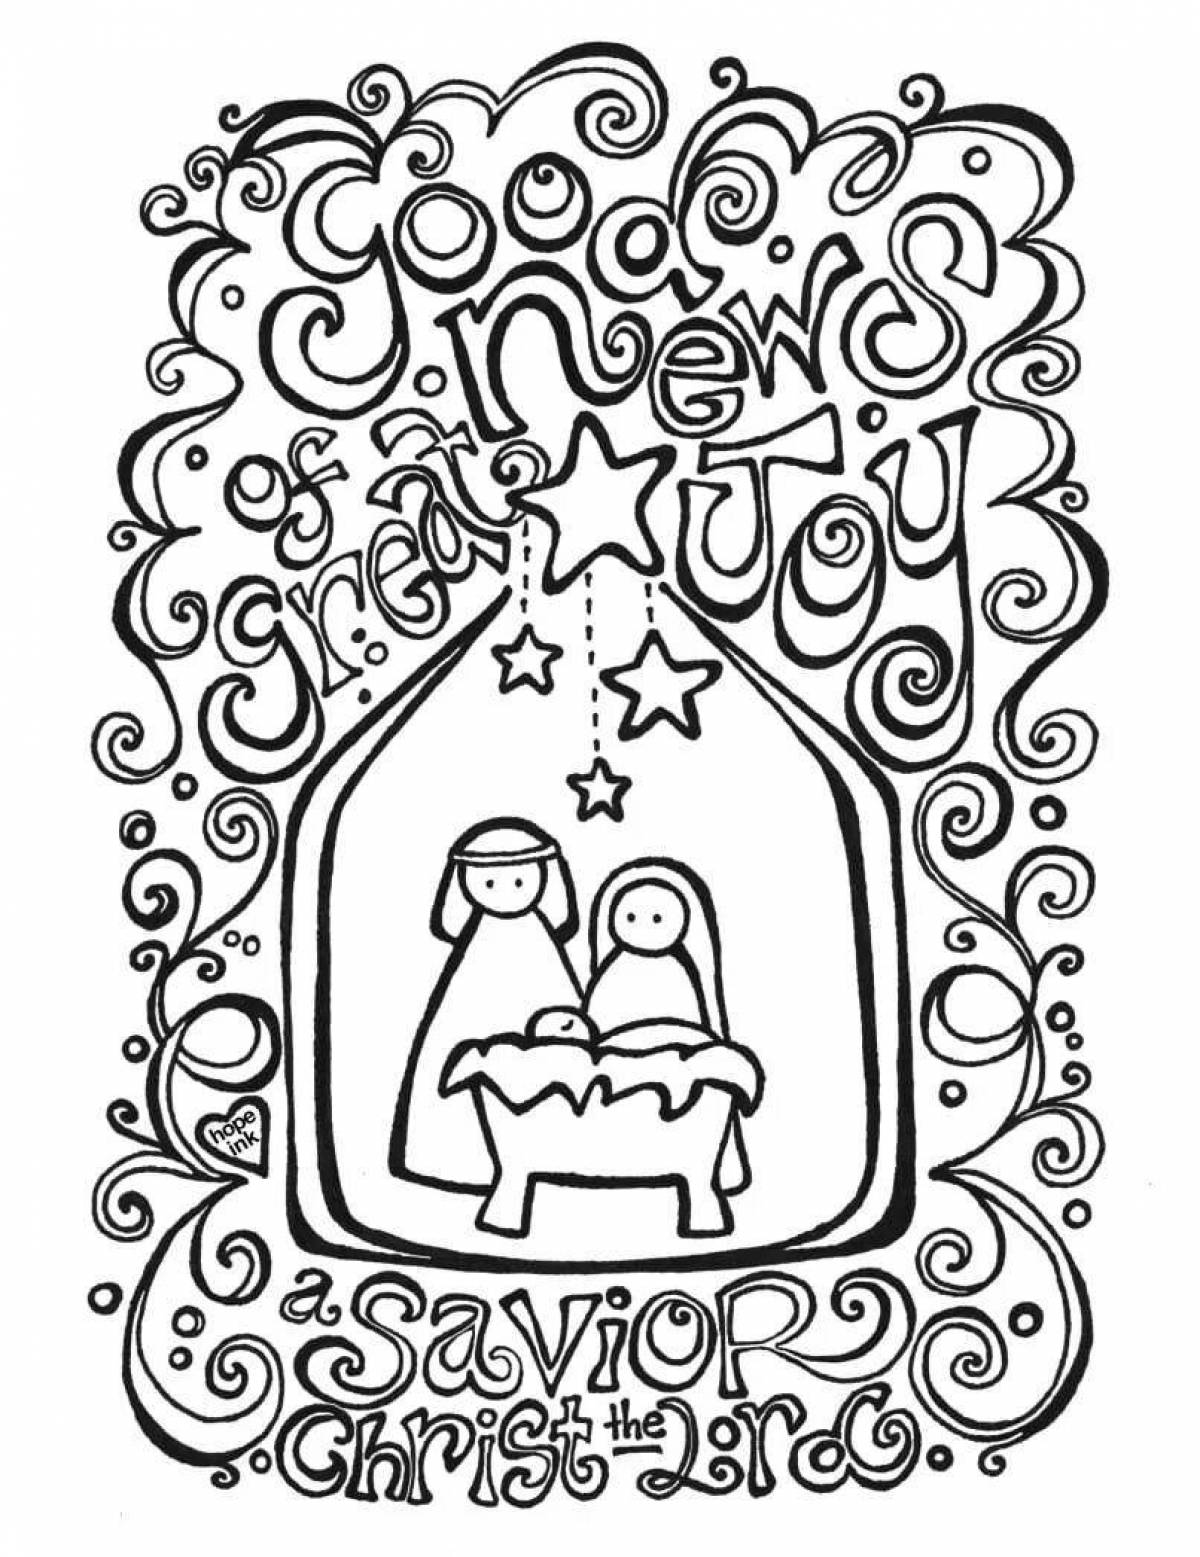 Coloring page nice nativity scene